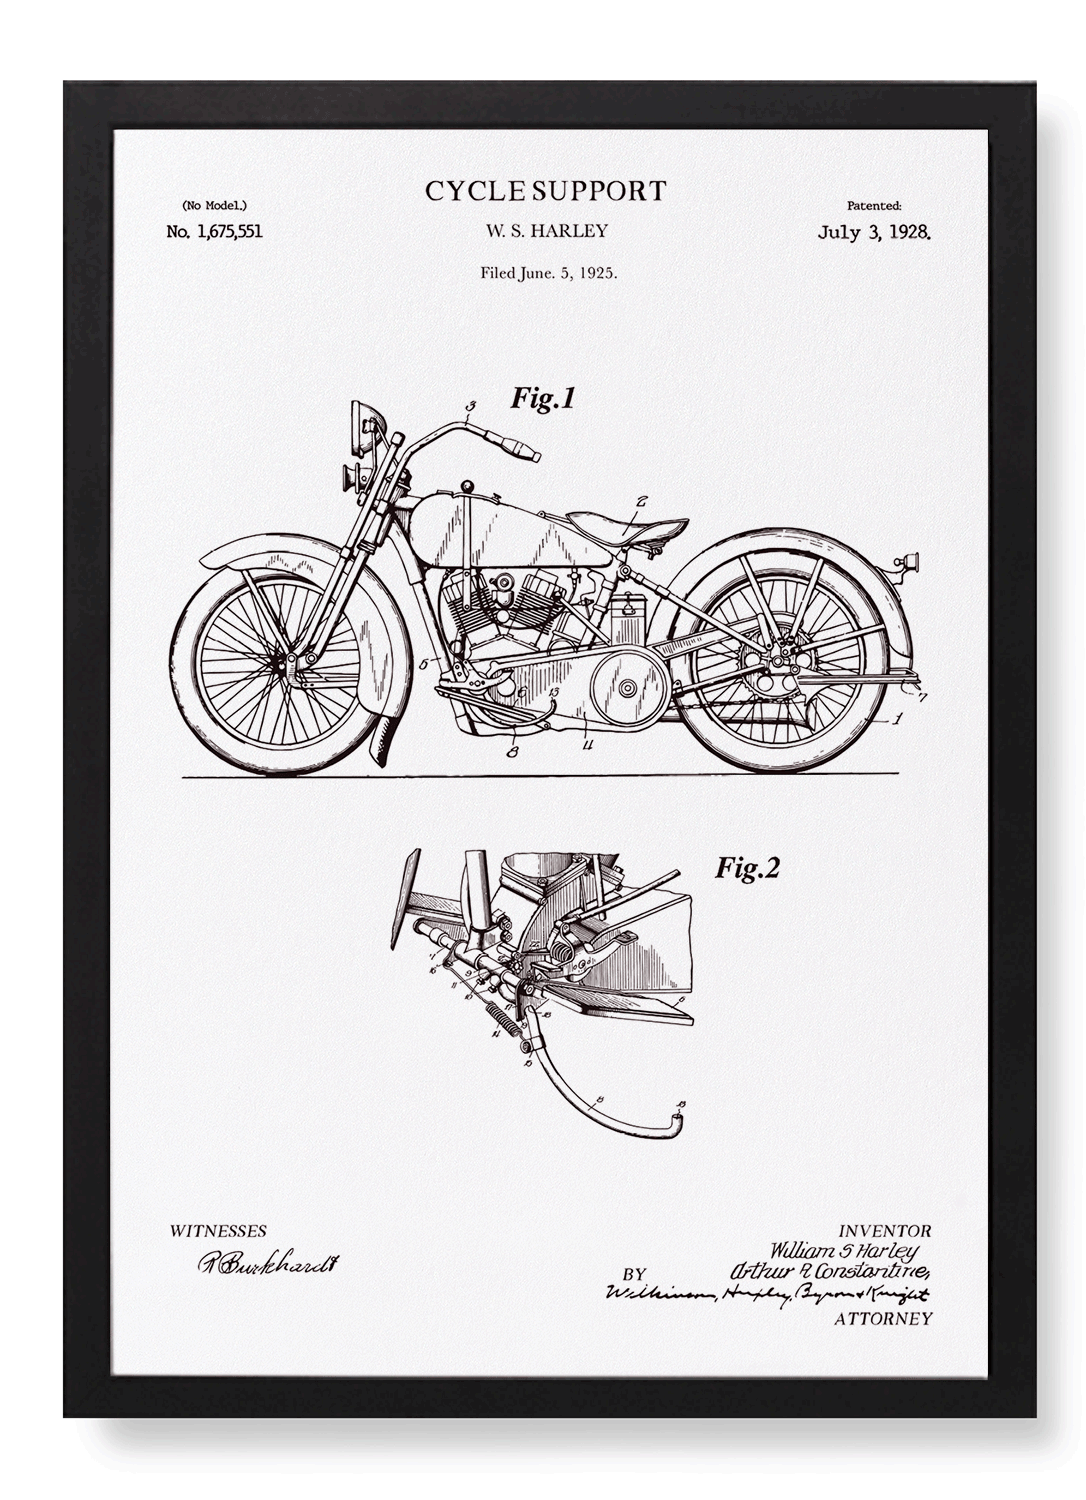 PATENT OF CYCLE SUPPORT (1928)